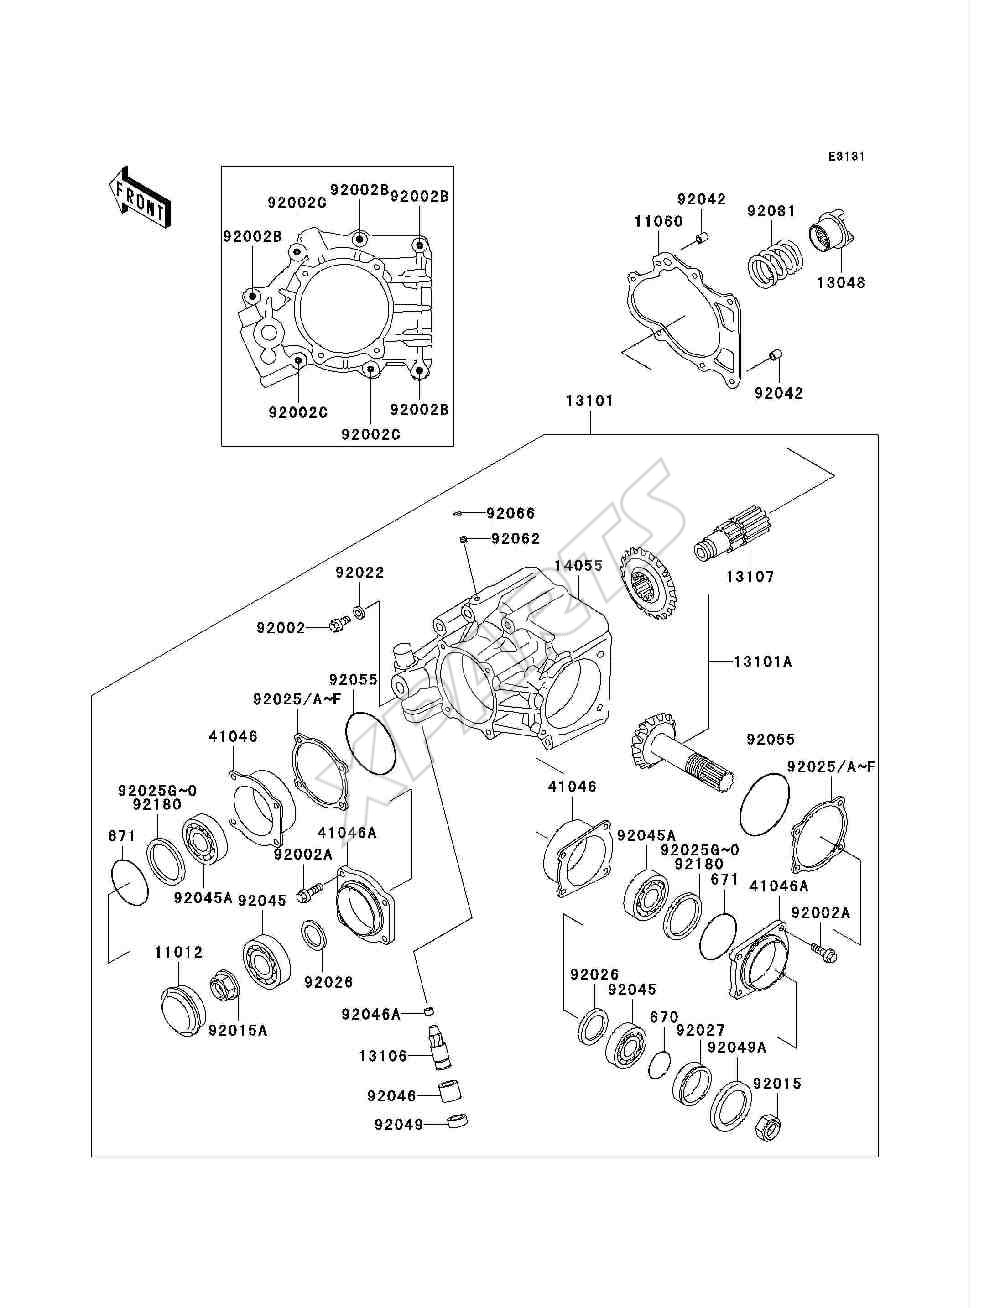 Picture for category Front Bevel Gear